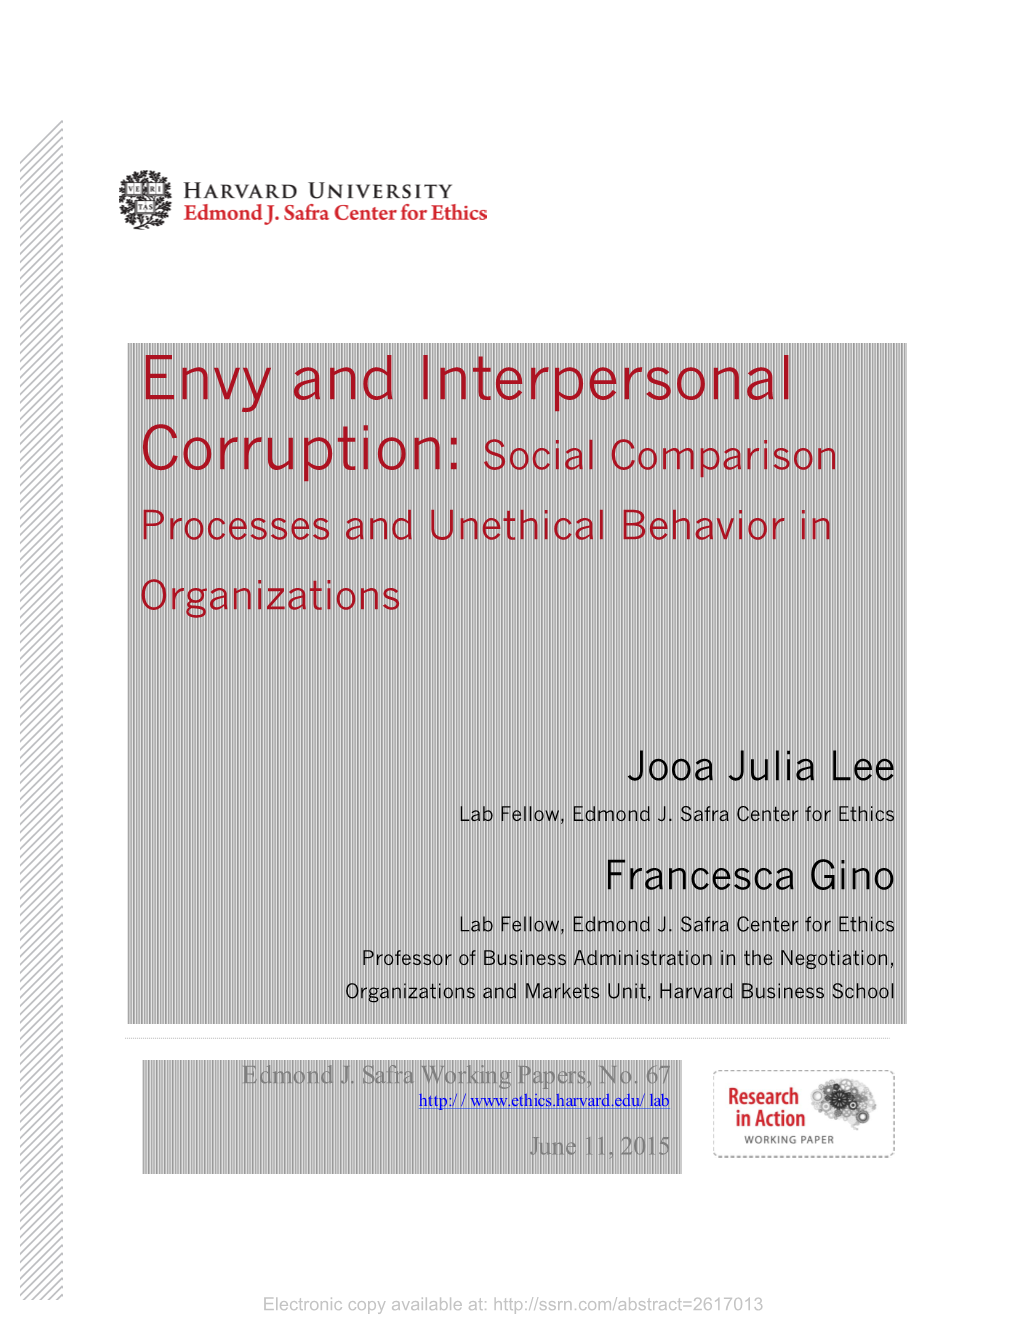 "Envy and Interpersonal Corruption: Social Comparison Processes And